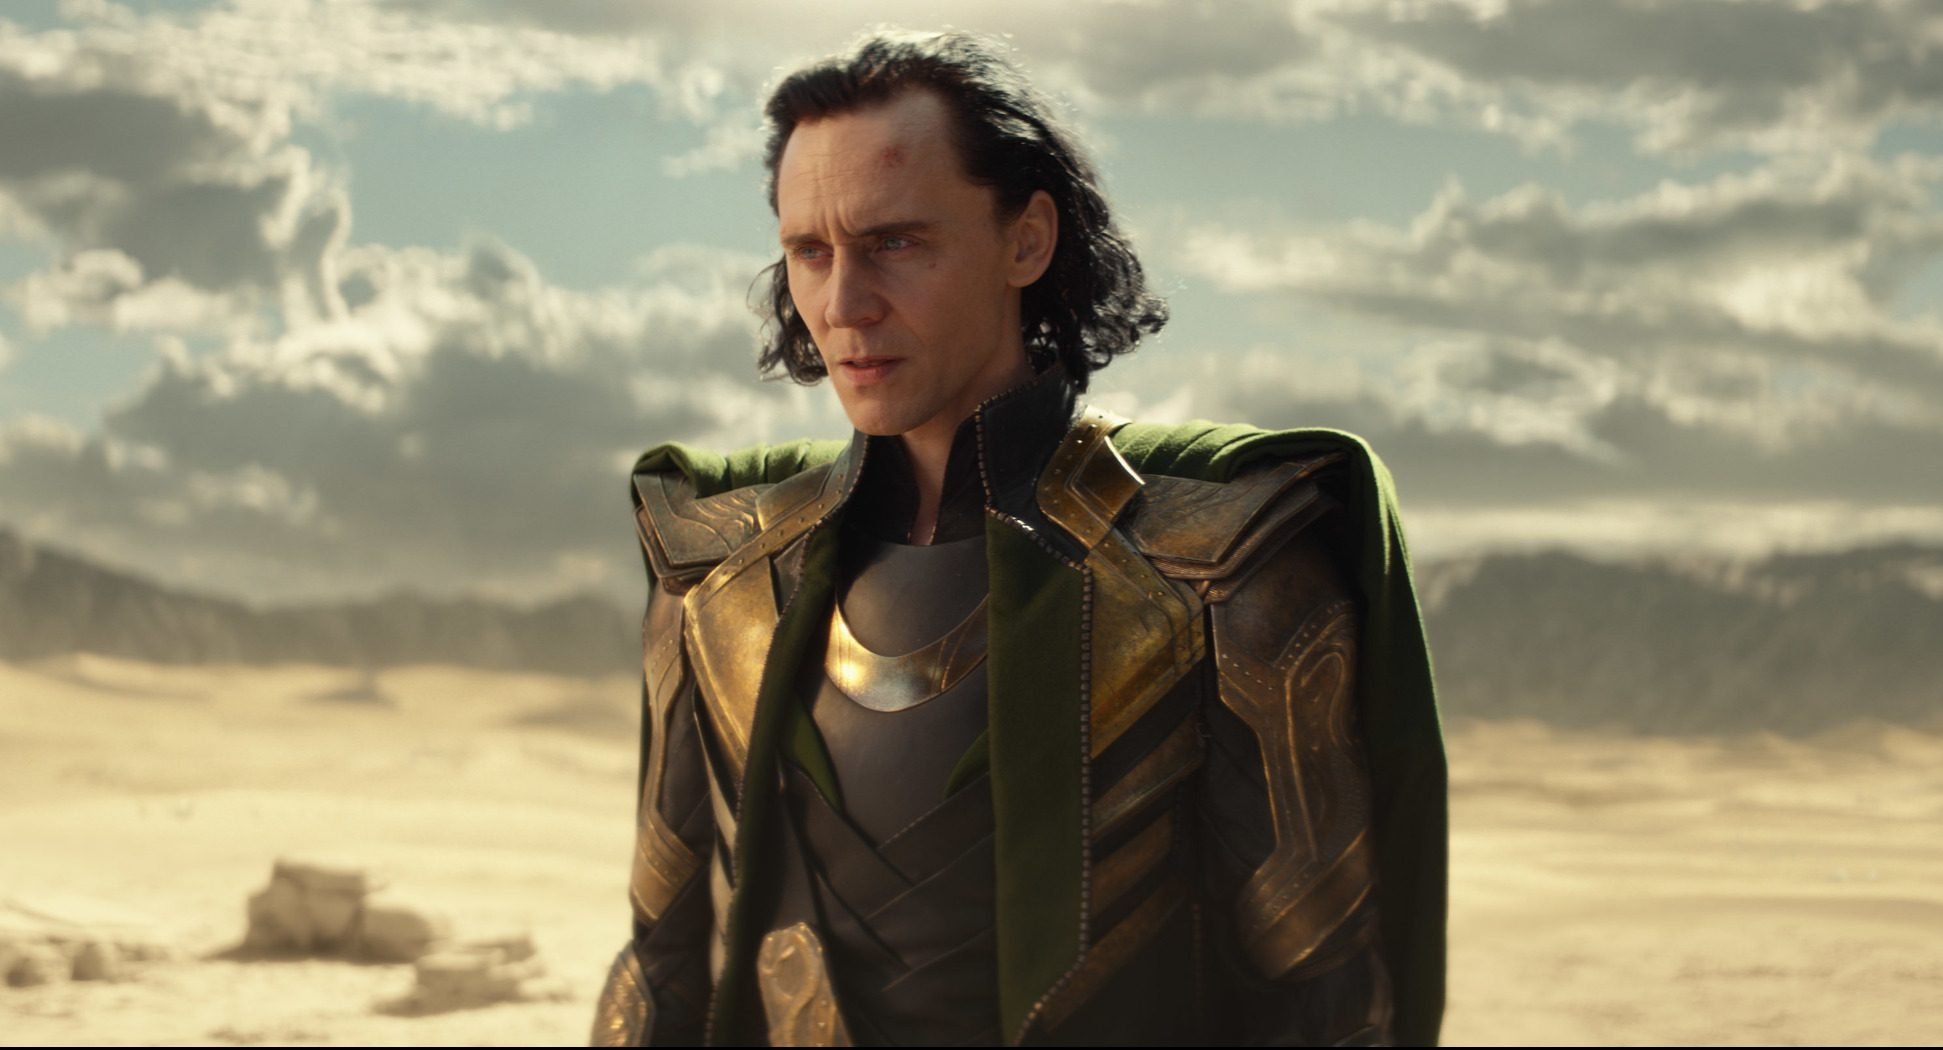 Loki Is ‘an Alien in Space’ and Could Be Pansexual, According to Fans